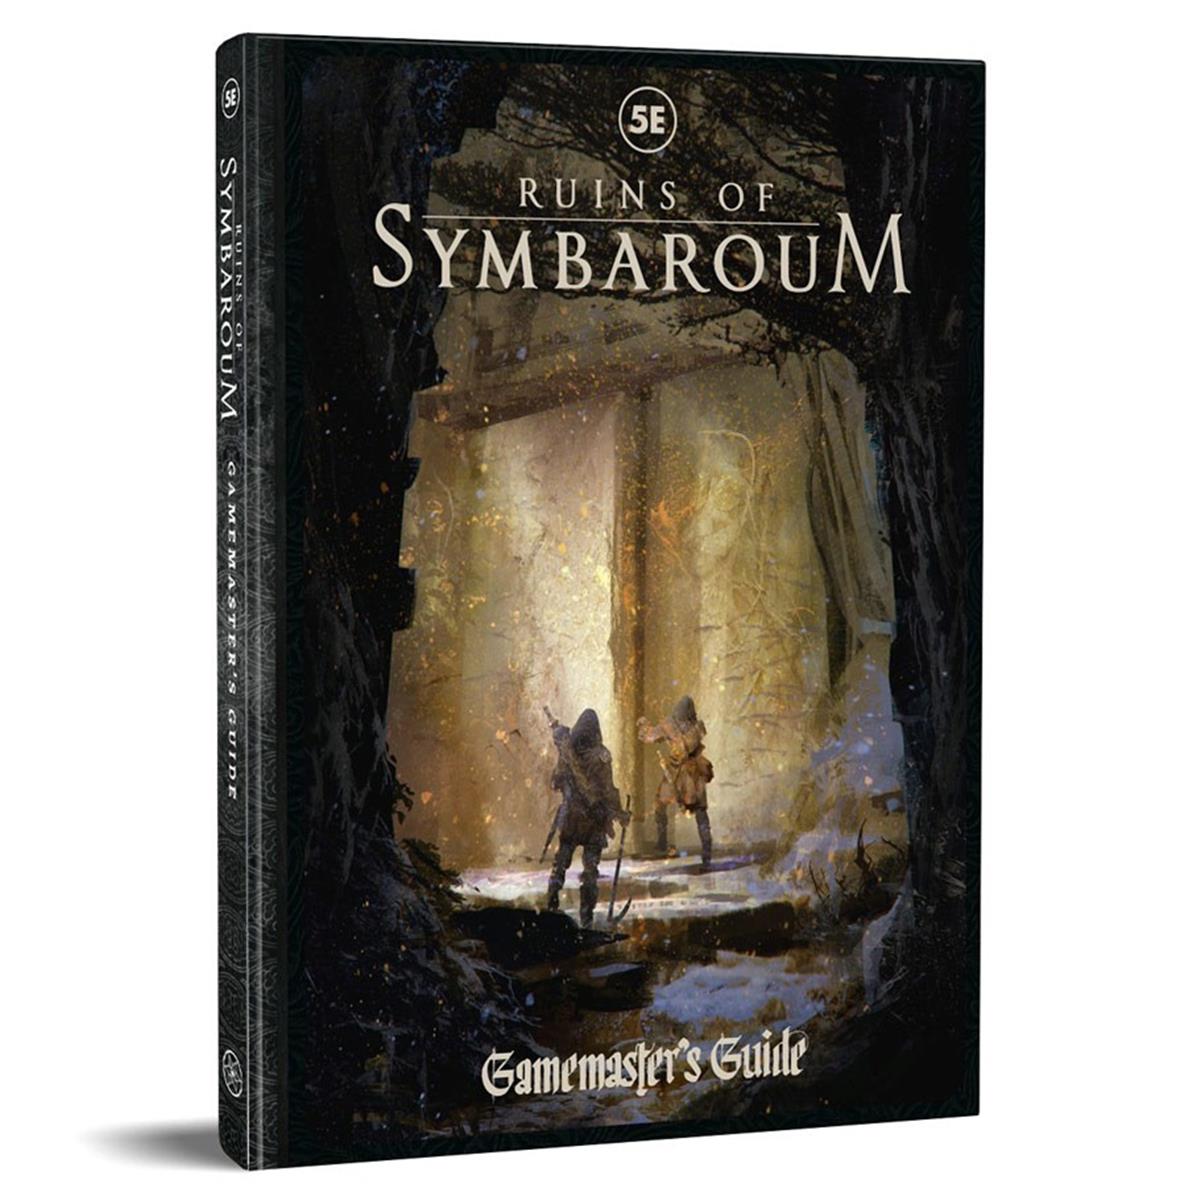 ISBN 9789189143265 product image for FLFSYM019 Ruins of Symbaroum 5E-Gamemasters Guide Role Playing Game | upcitemdb.com